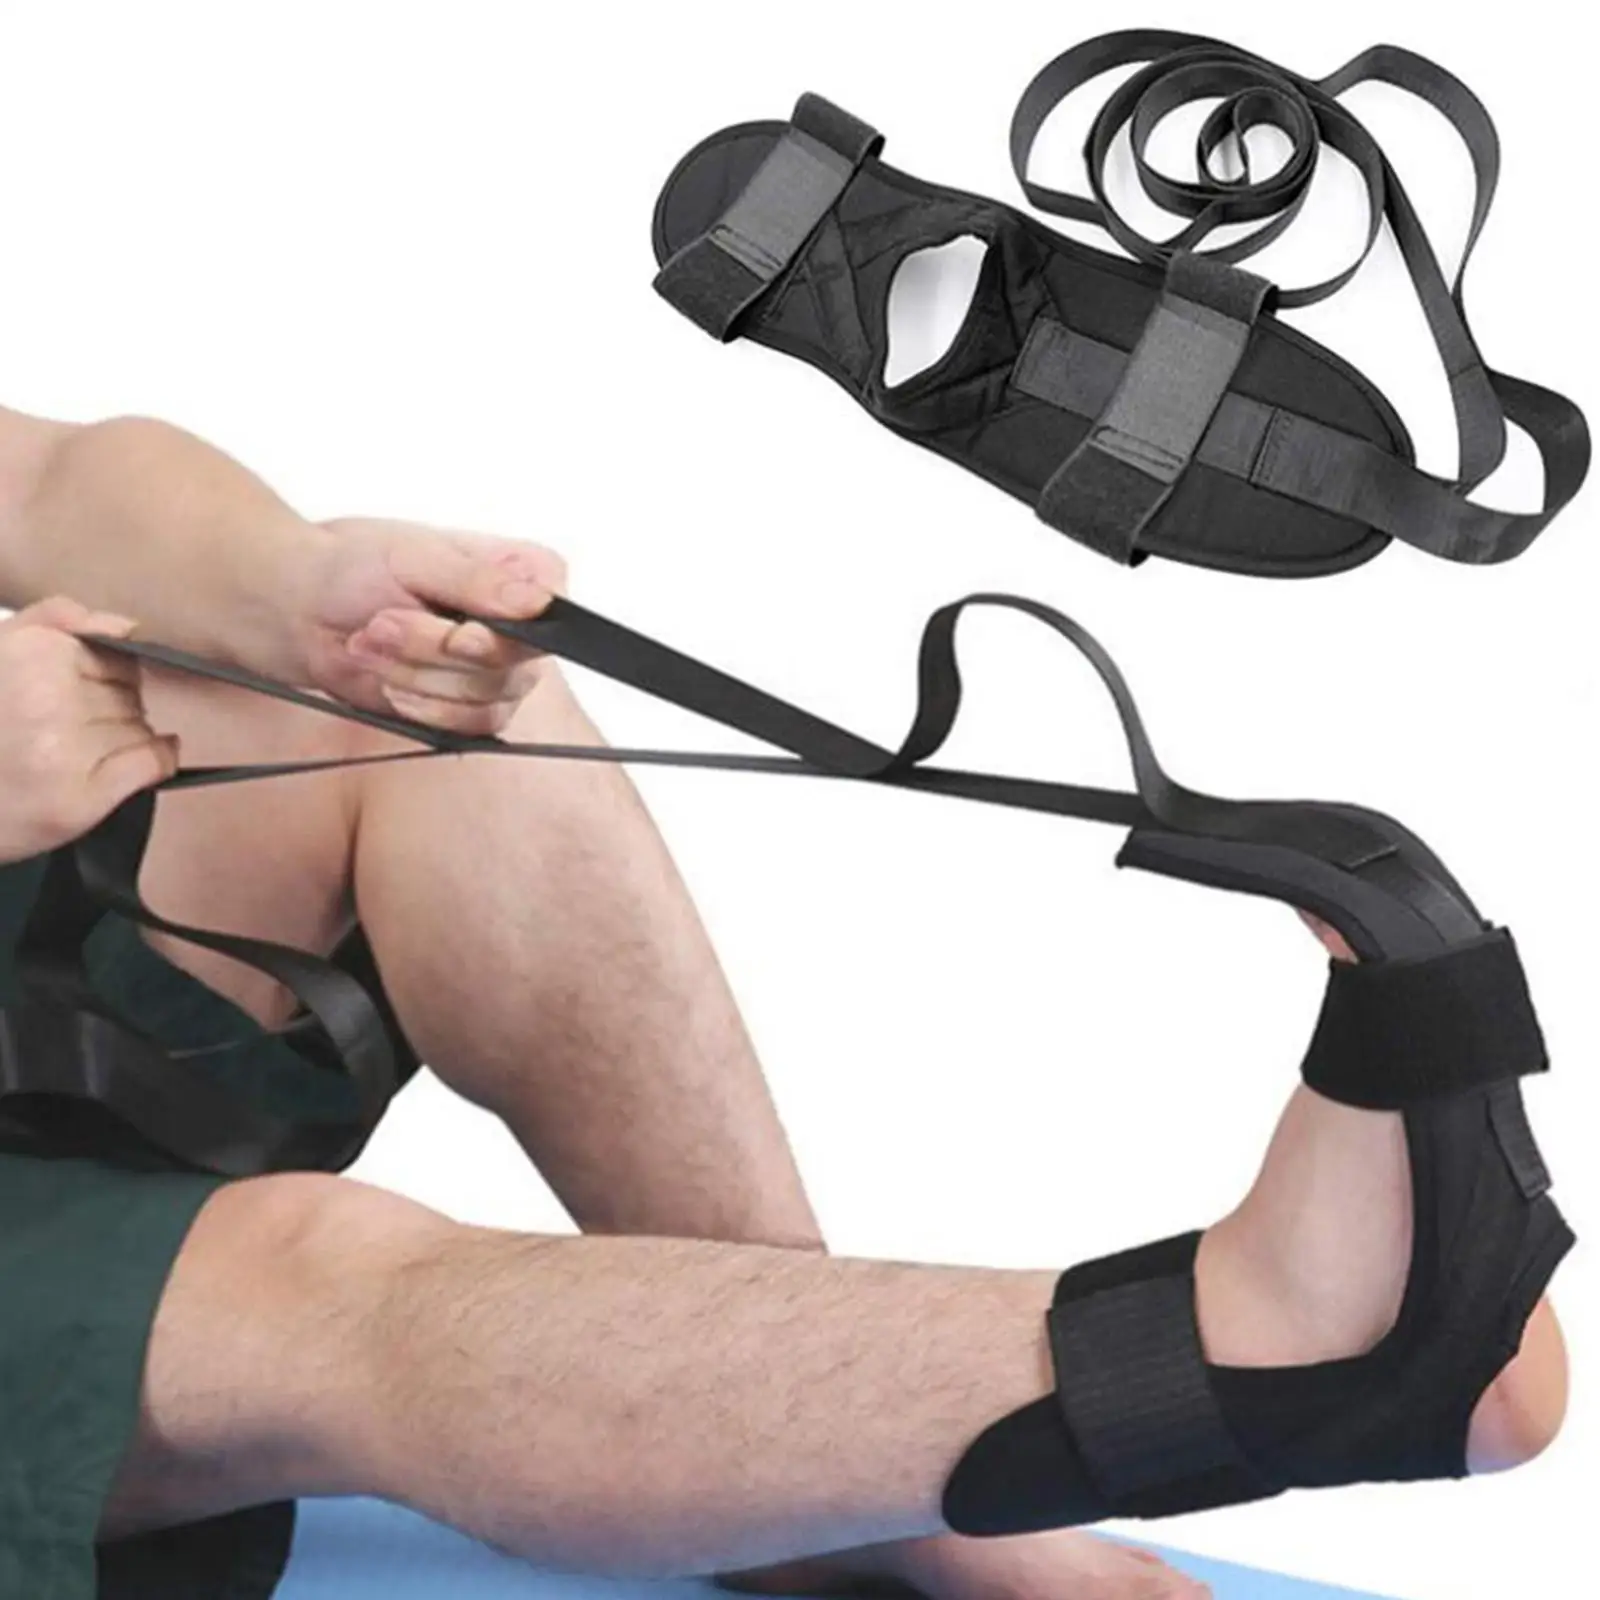  & Foot Stretcher Set Stretching for Physical Therapy Plantar Fasciitis Pilates Dance Athletic Trainers